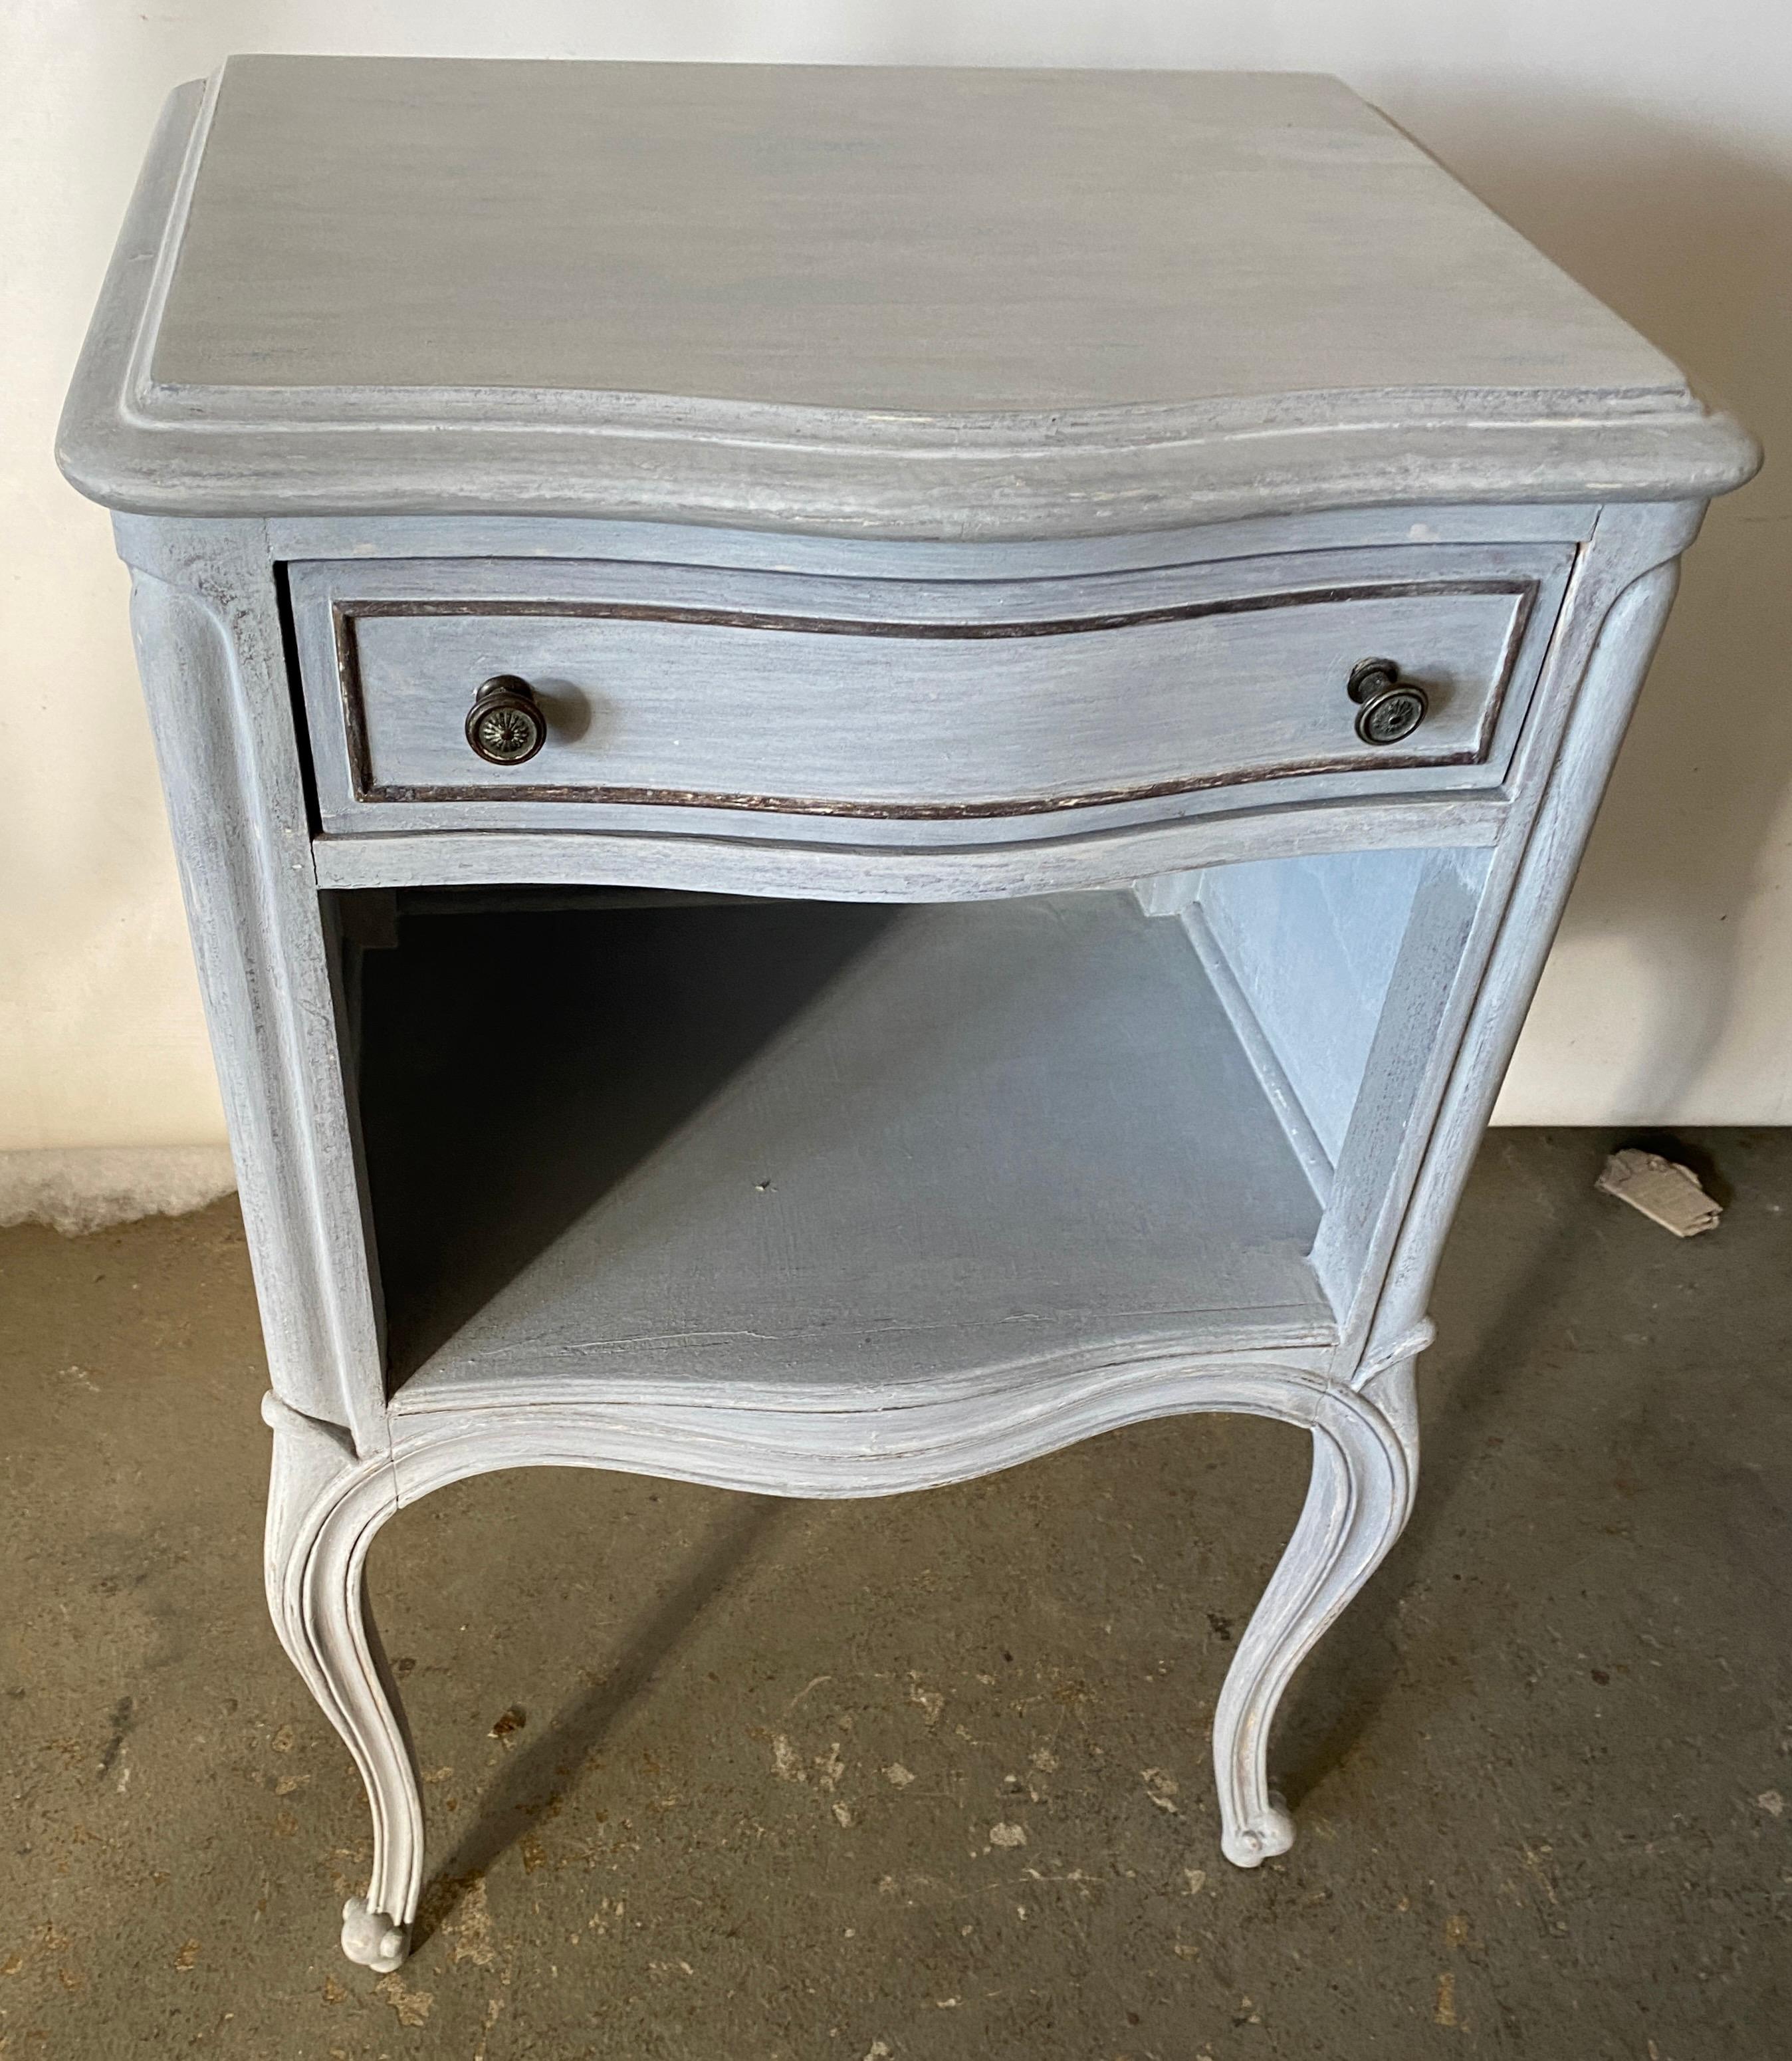 The grey and gold gilt painted metal night stand has an open upper shelf with a pull out tray and a cubby hole or lower shelf for more storage. This night table or stand will fill the bill if you are searching for a Swedish Gustavian, neoclassical